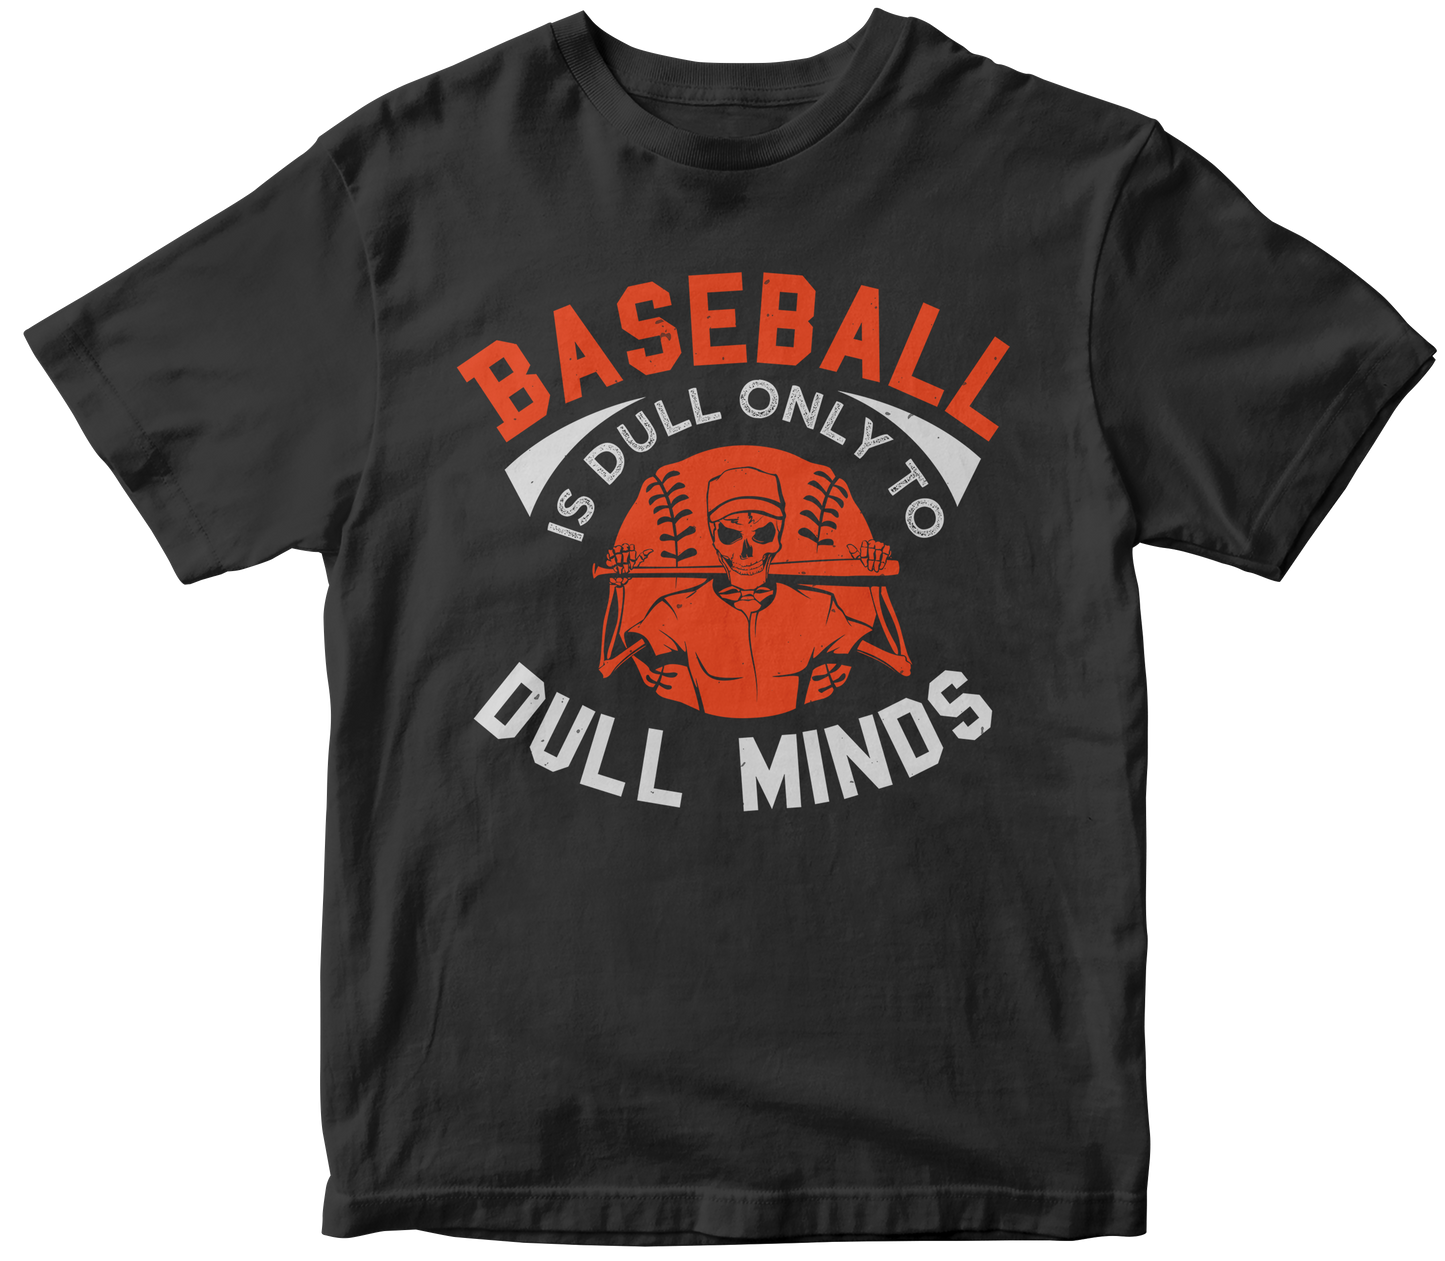 Baseball is dull only to dull minds